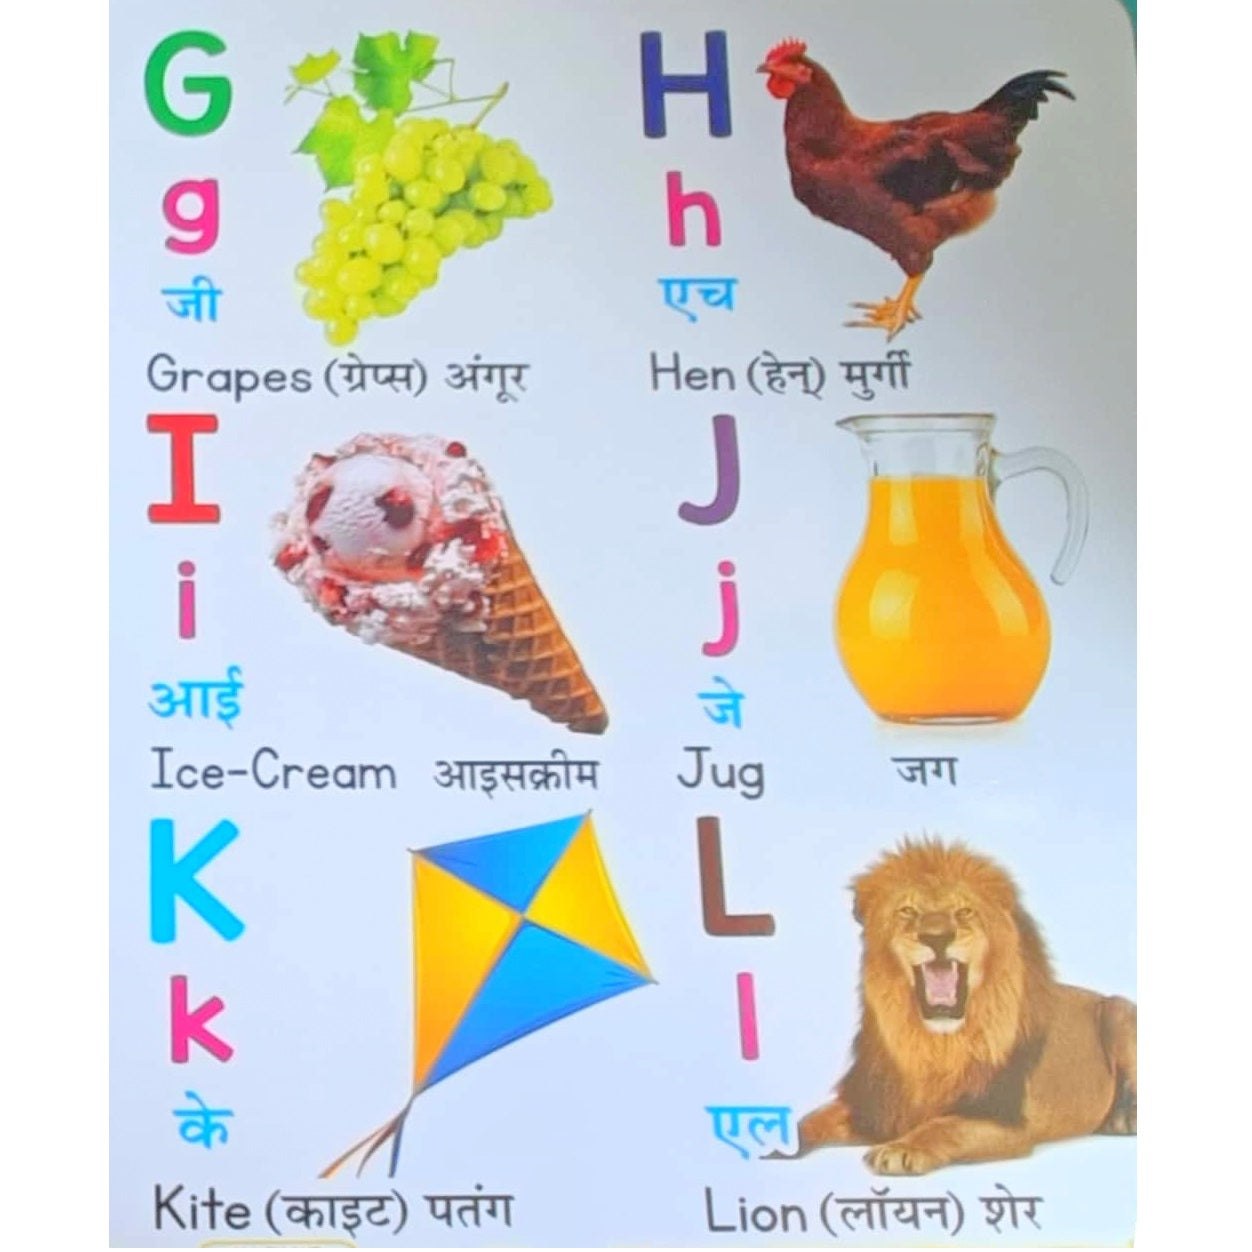 Alphabets learning through All in One Pictorial Book